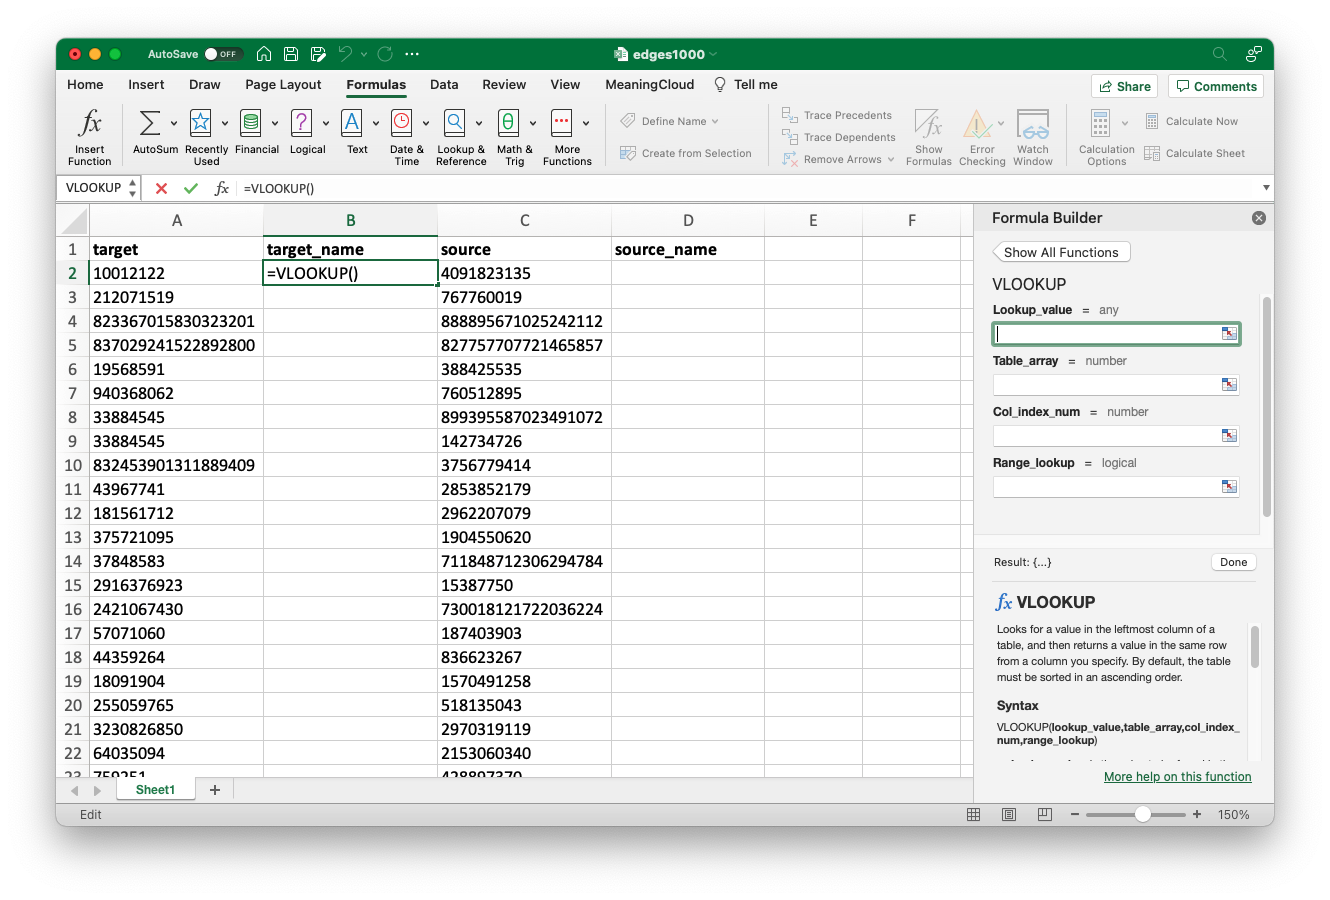 The VLOOKUP formula builder provides fields for input values.